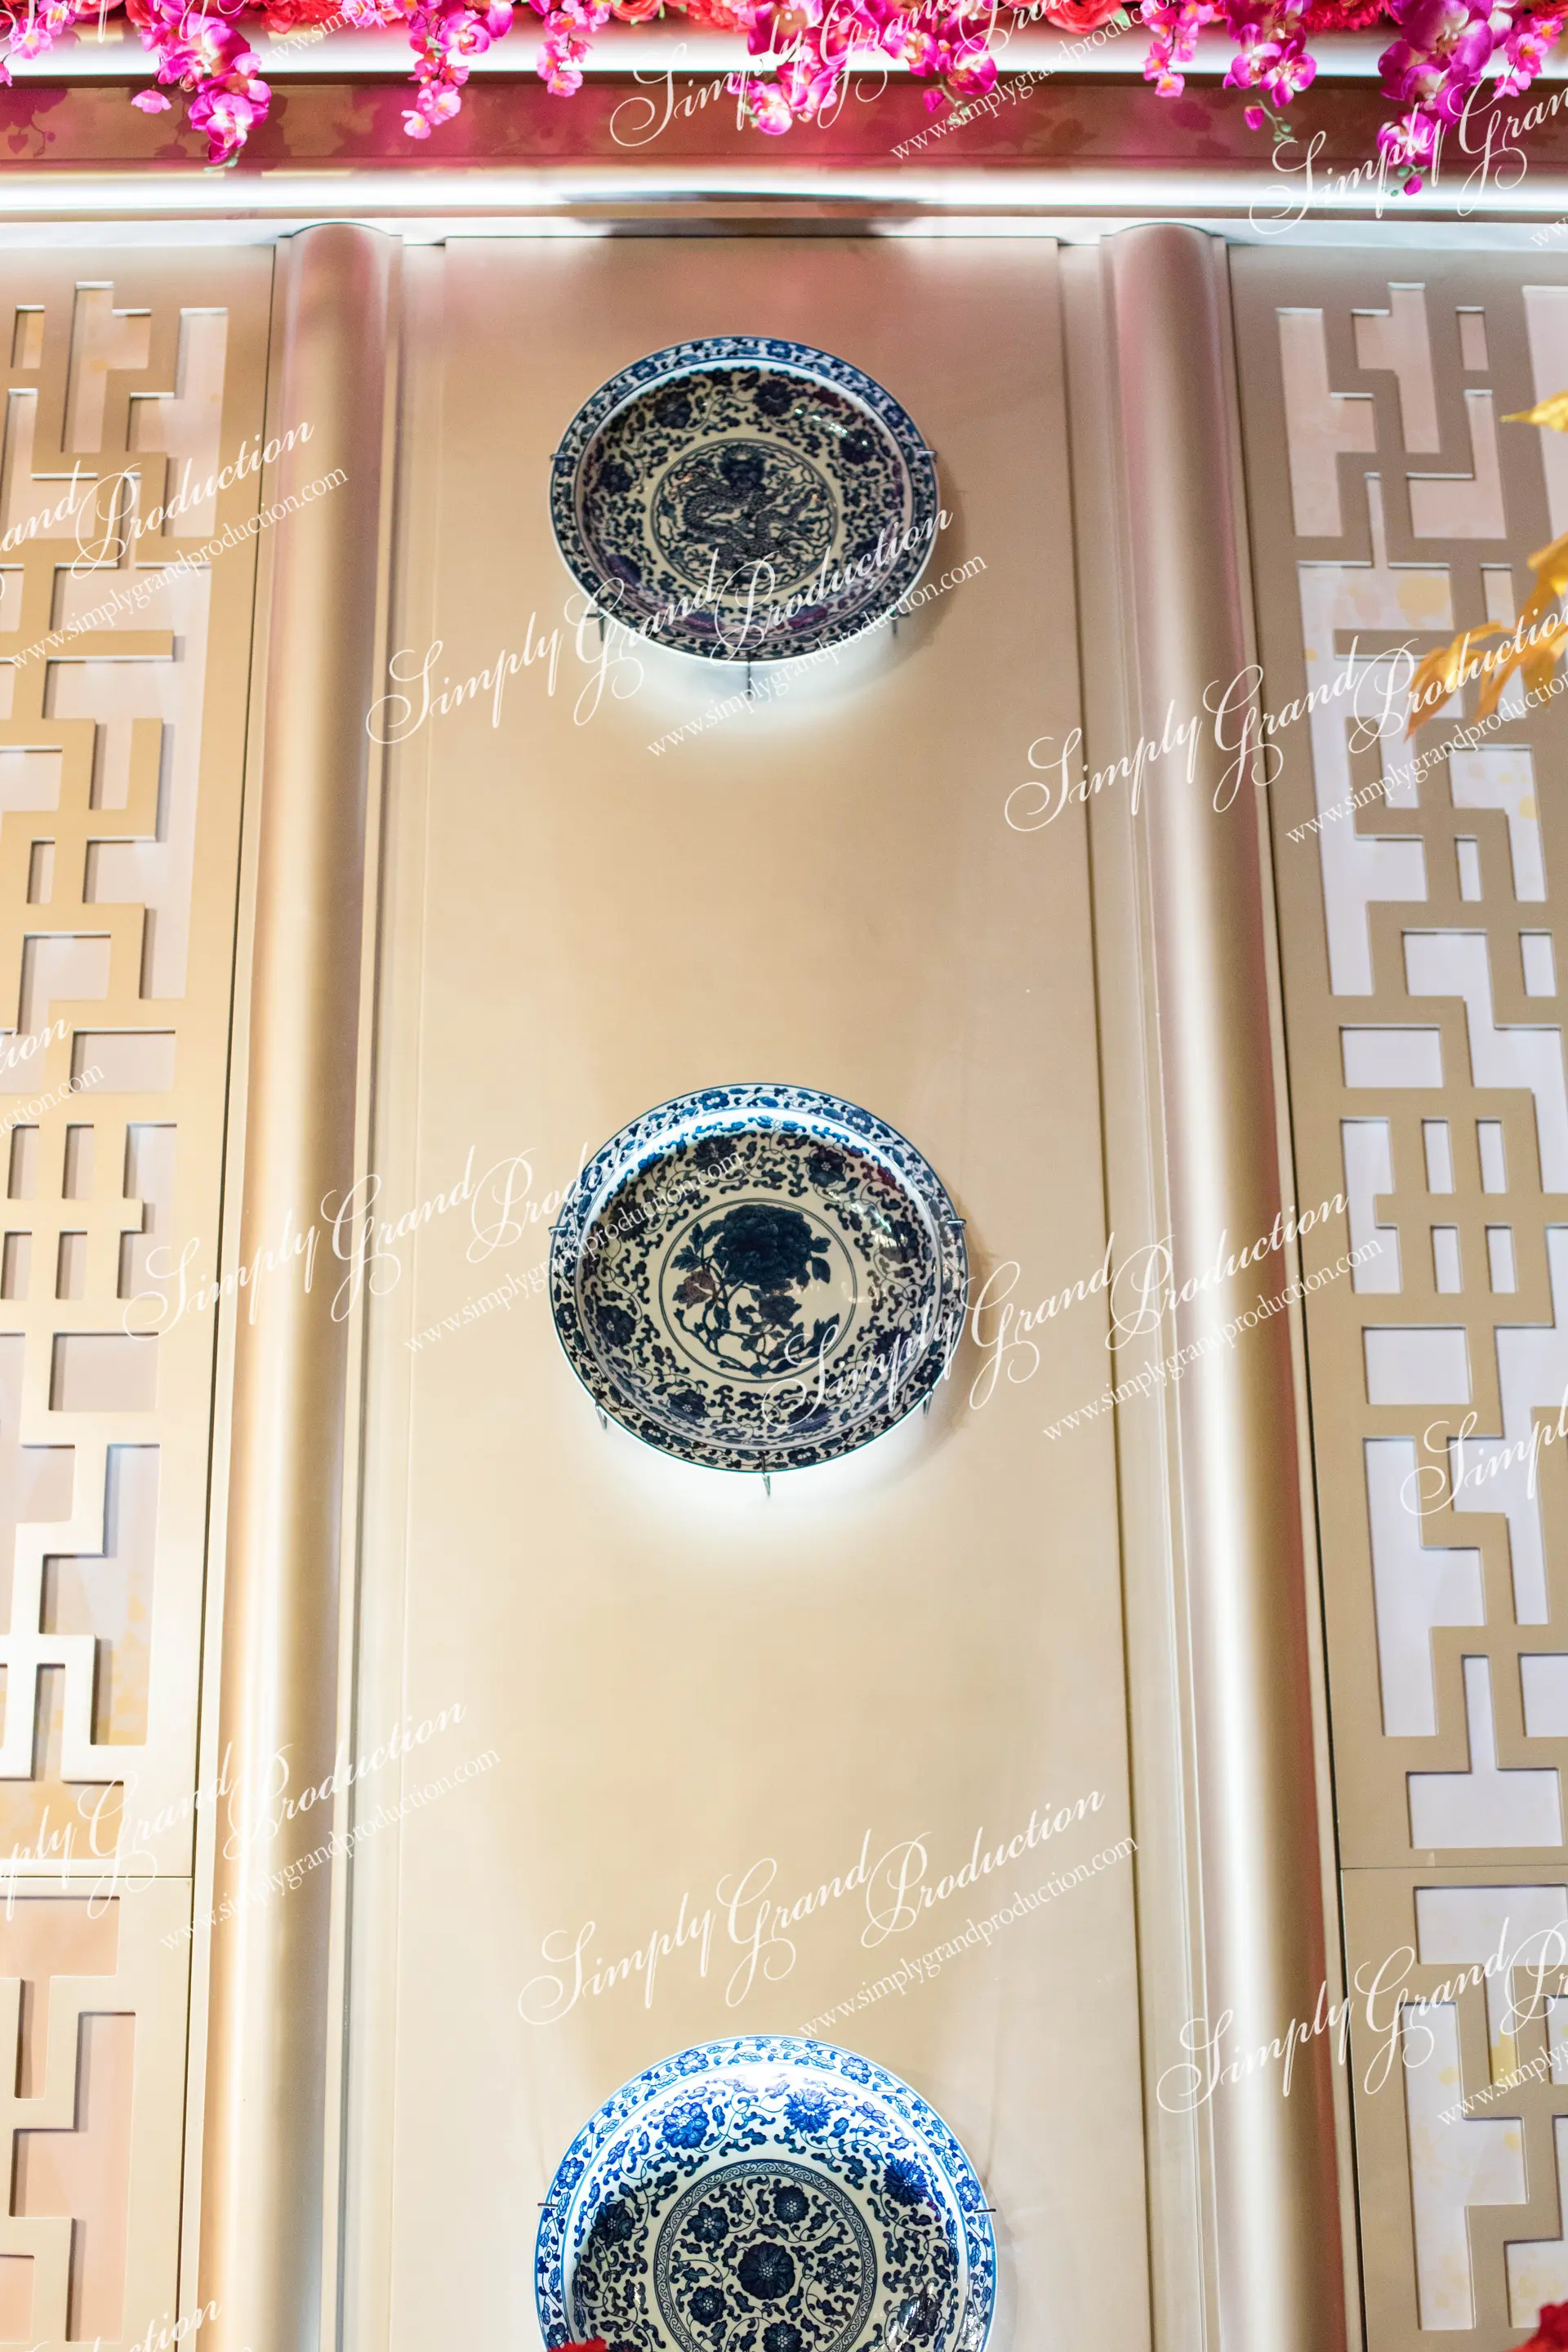 Simply_Grand_Production_Chinese_Foshan_wedding_decoration_chinaware_plate_1_14